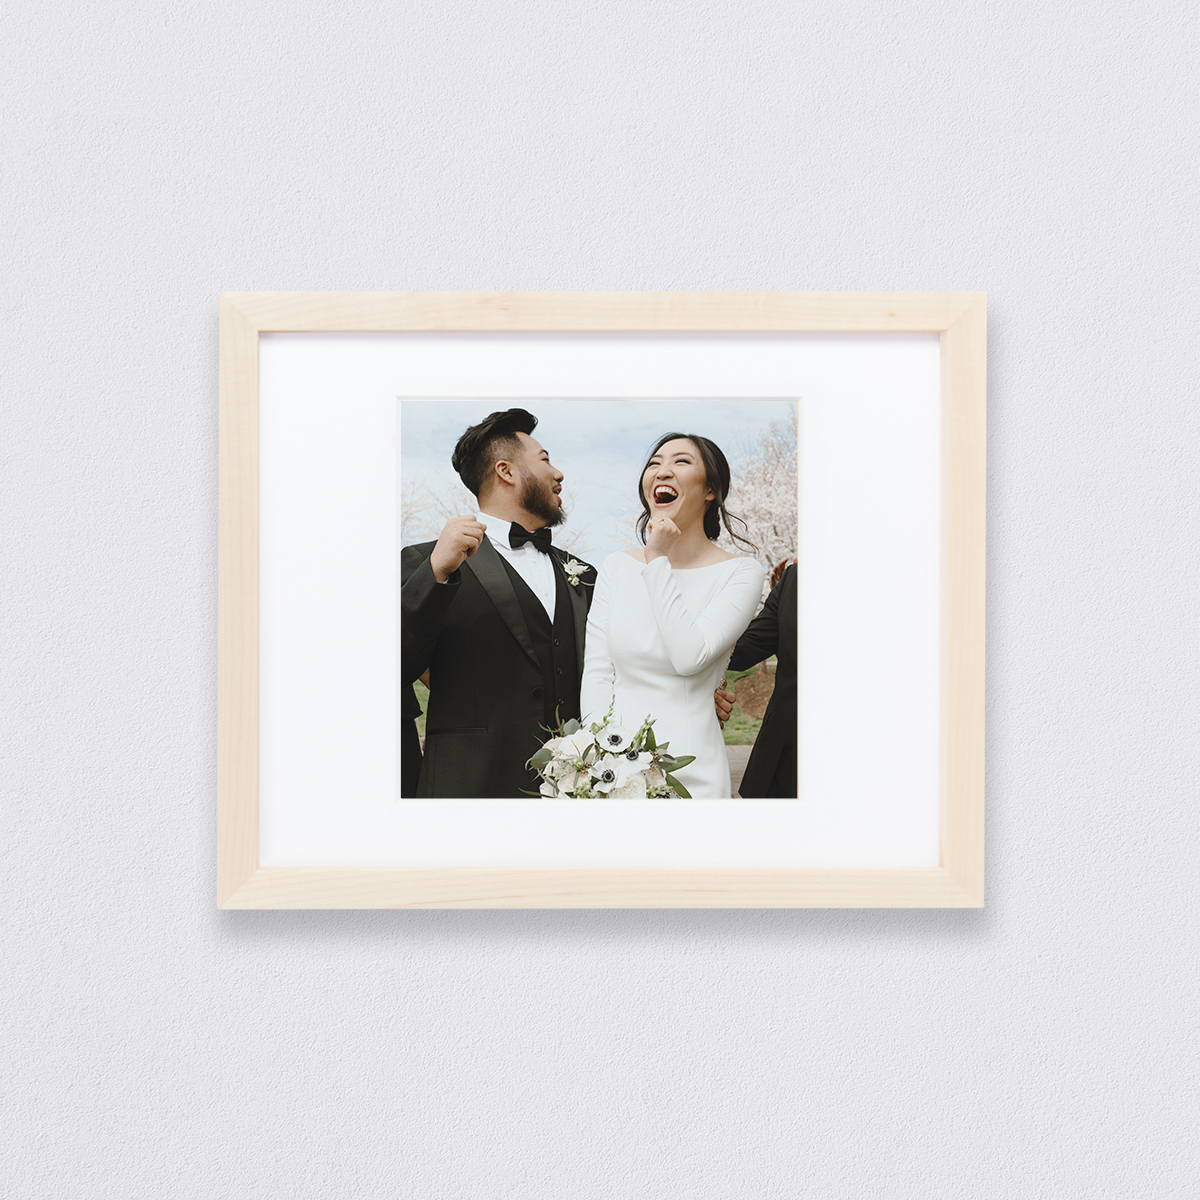 Wedding photo of jubilant couple matted to a 12 inch square inside a maple 20 x 16 inch Artifact Uprising Gallery Frame